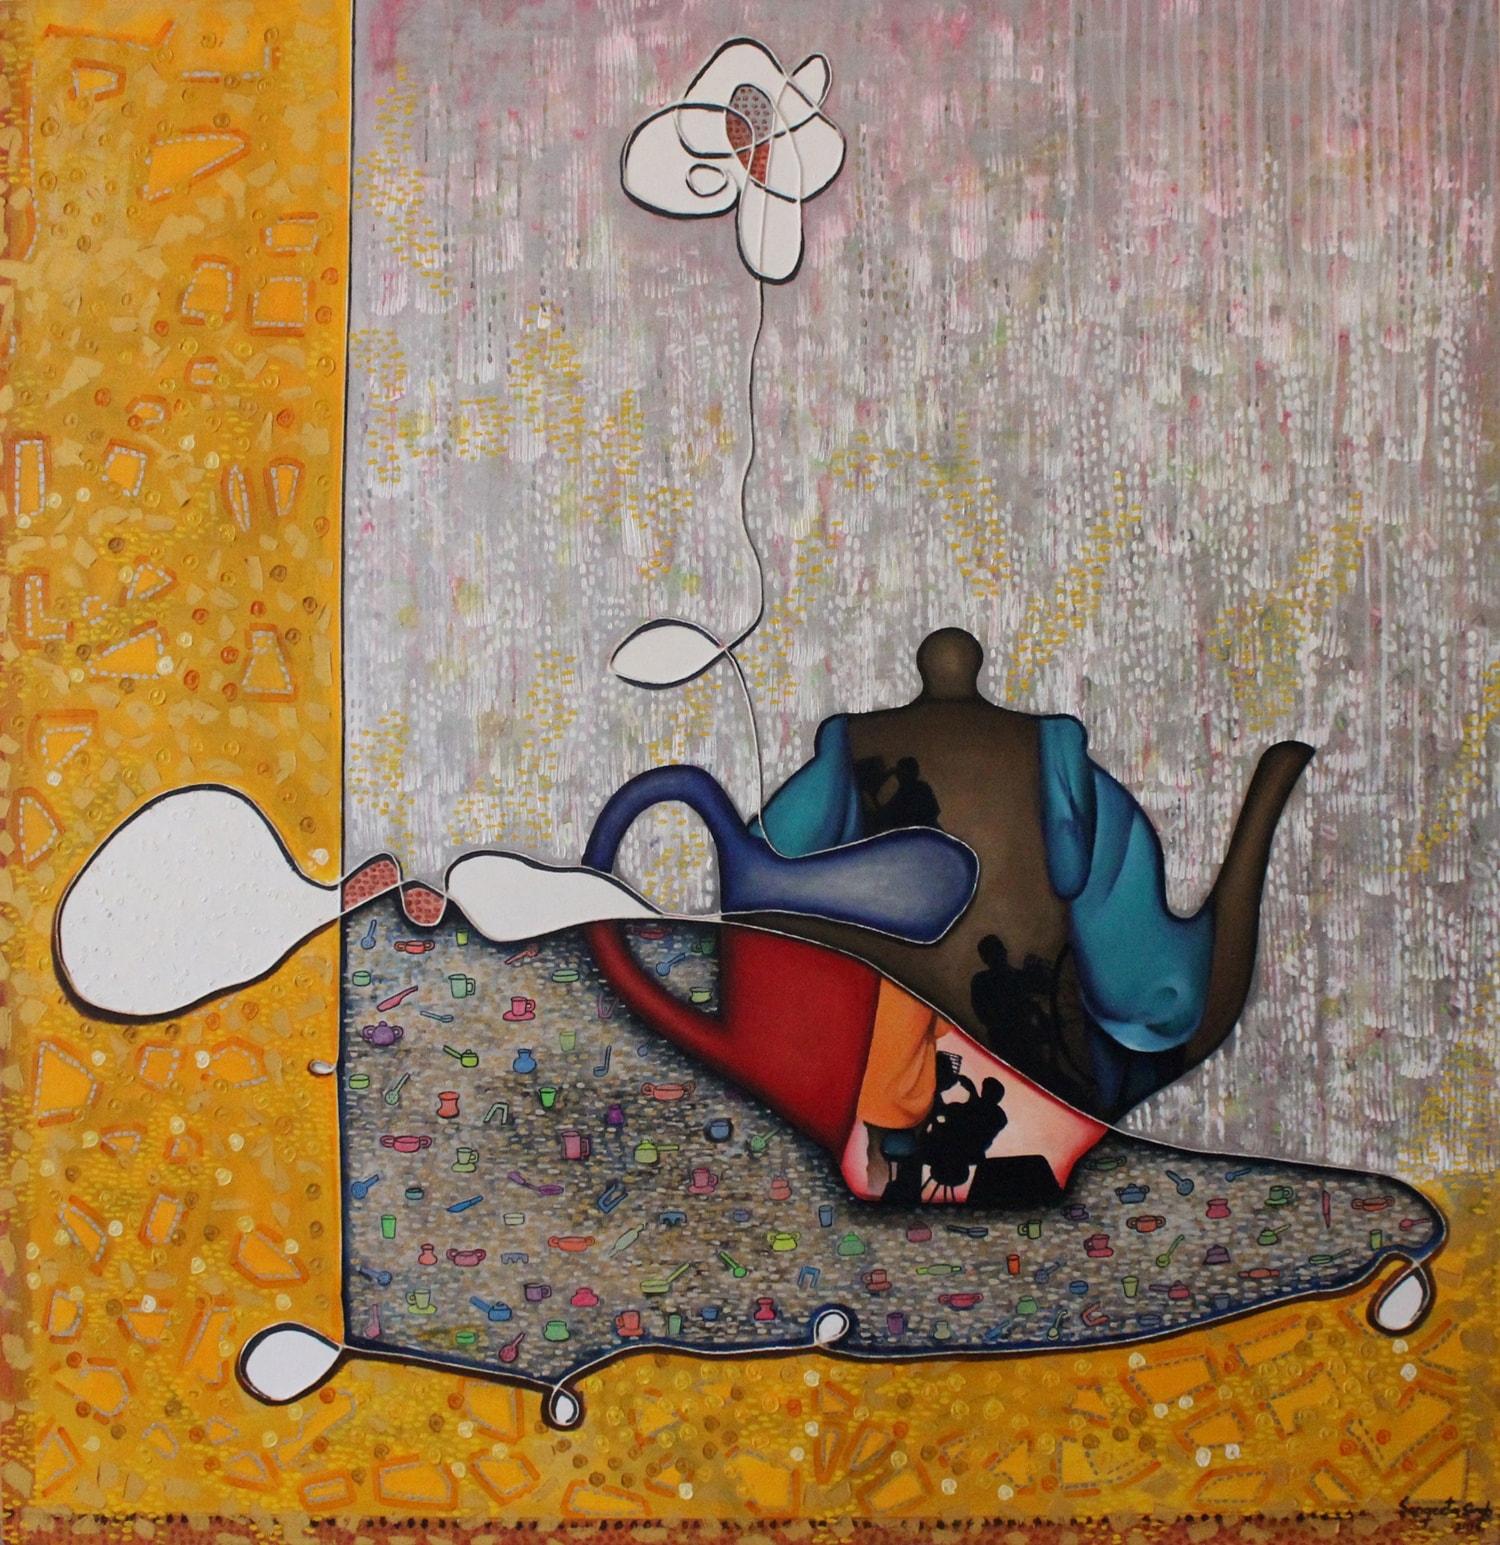 Tea Side Story, Mixed Media on Canvas by Contemporary Indian Artist “In Stock”